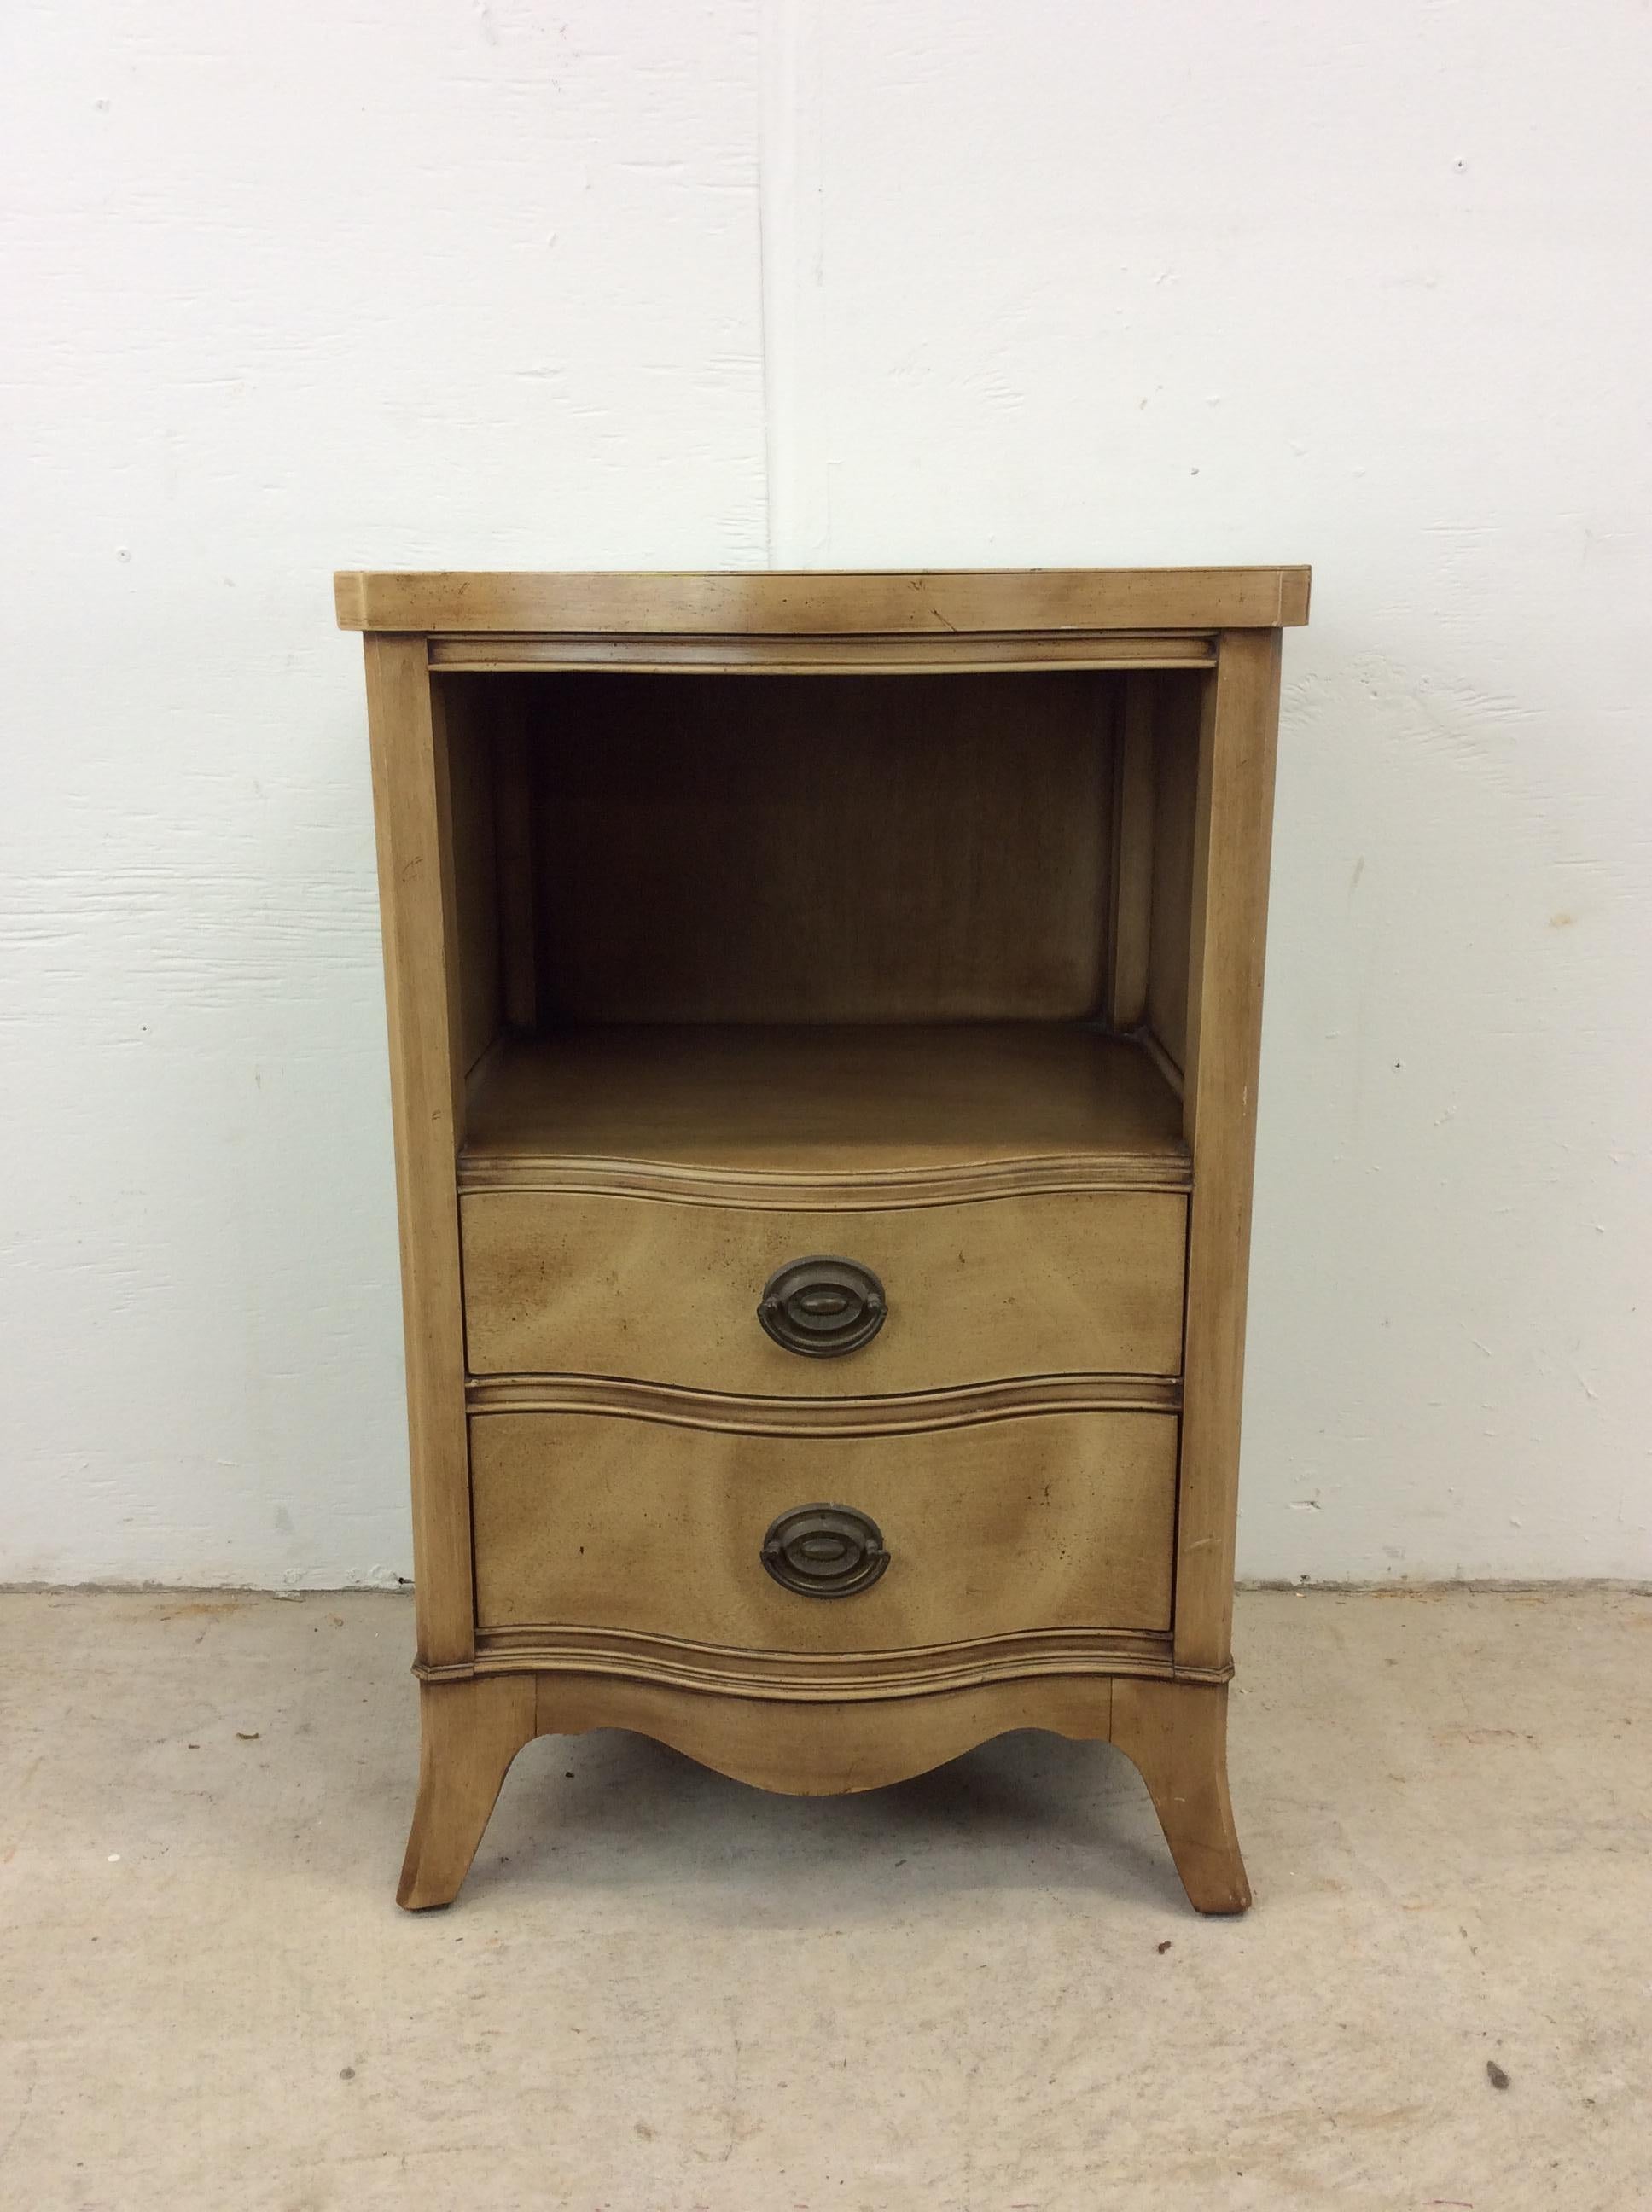 This mid century nightstand by Drexel features hardwood construction, original bleached walnut veneer, two dovetailed drawers with curved fronts and brass hardware, opened storage shelf, and tall tapered legs. 

Matching highboy dresser, lowboy